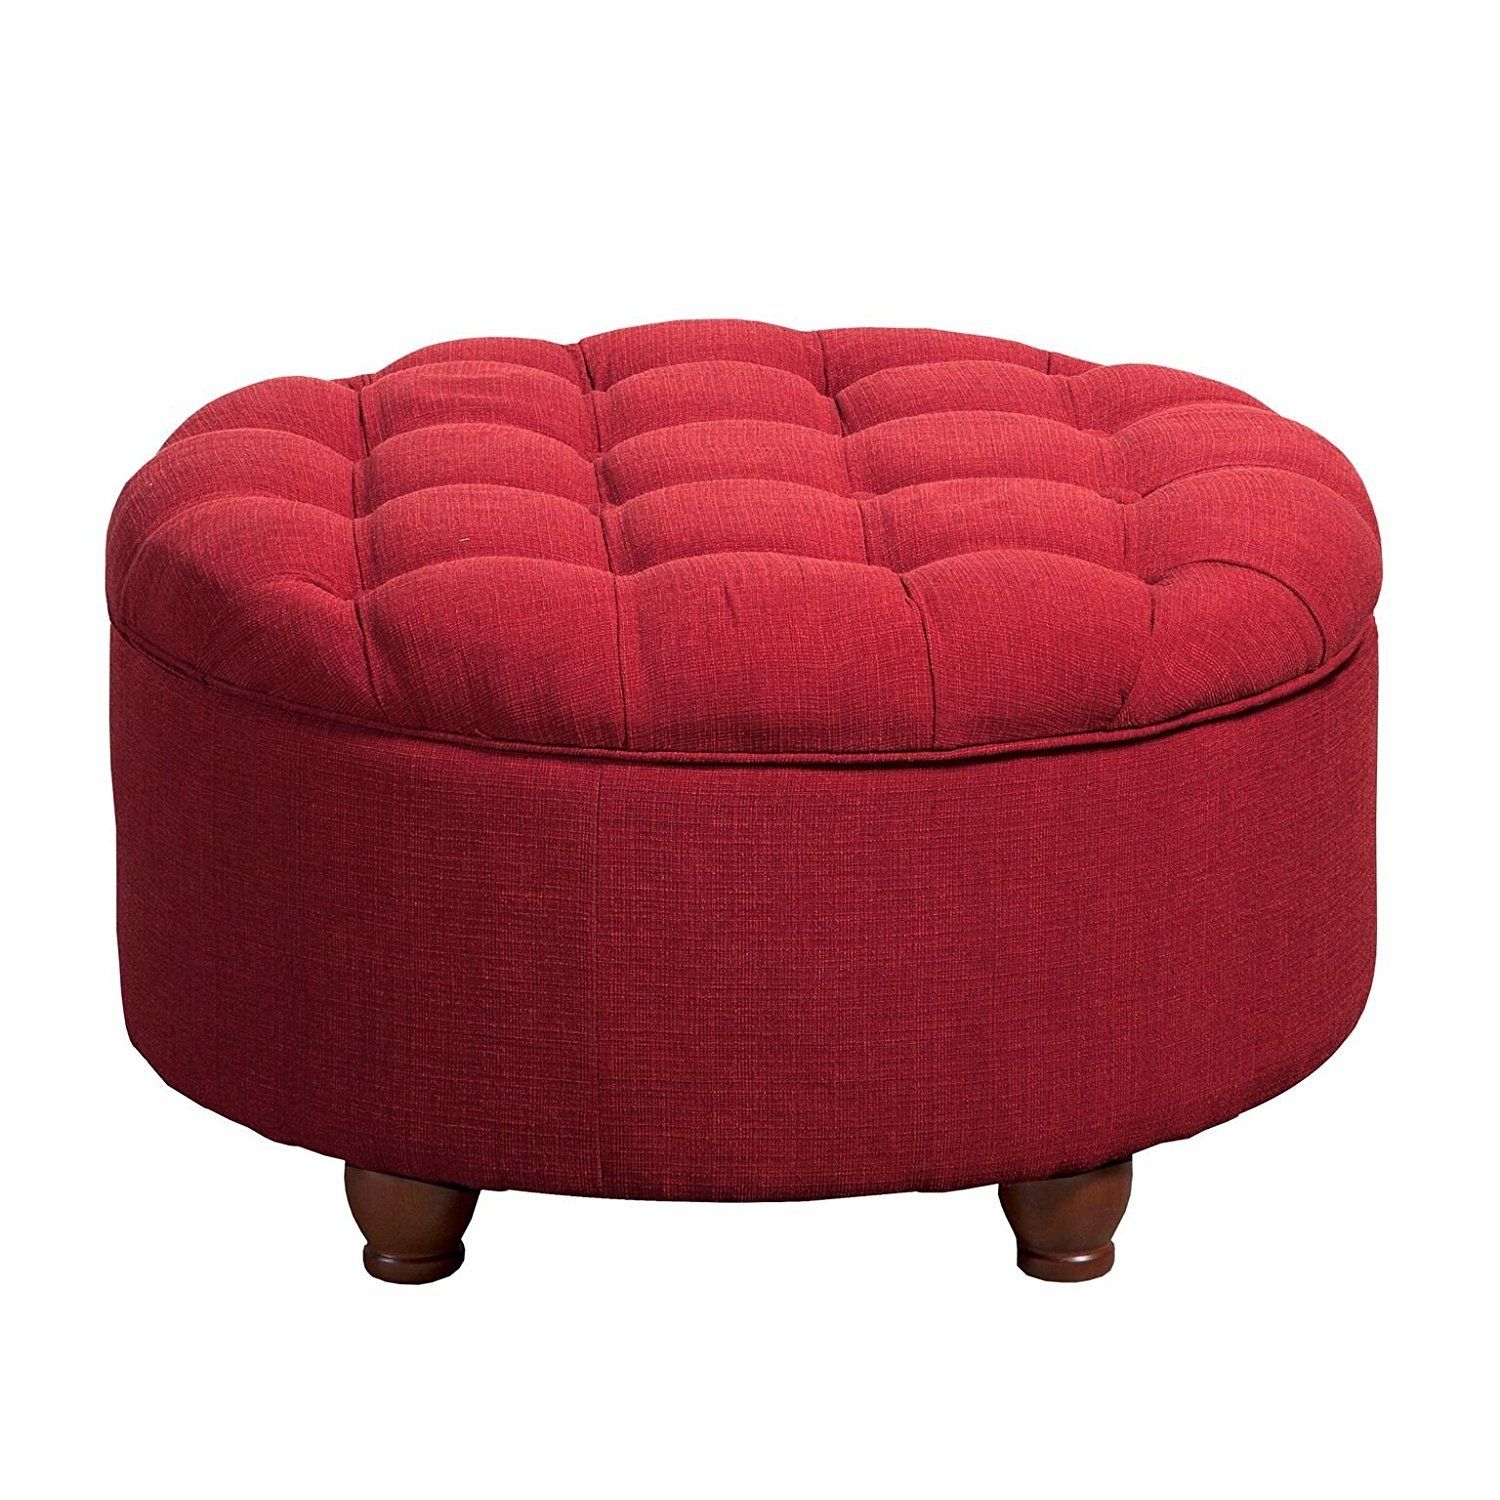 Kinfine Large Upholstered Round Tufted Storage Ottoman With Removable Regarding Fabric Tufted Round Storage Ottomans (View 3 of 20)